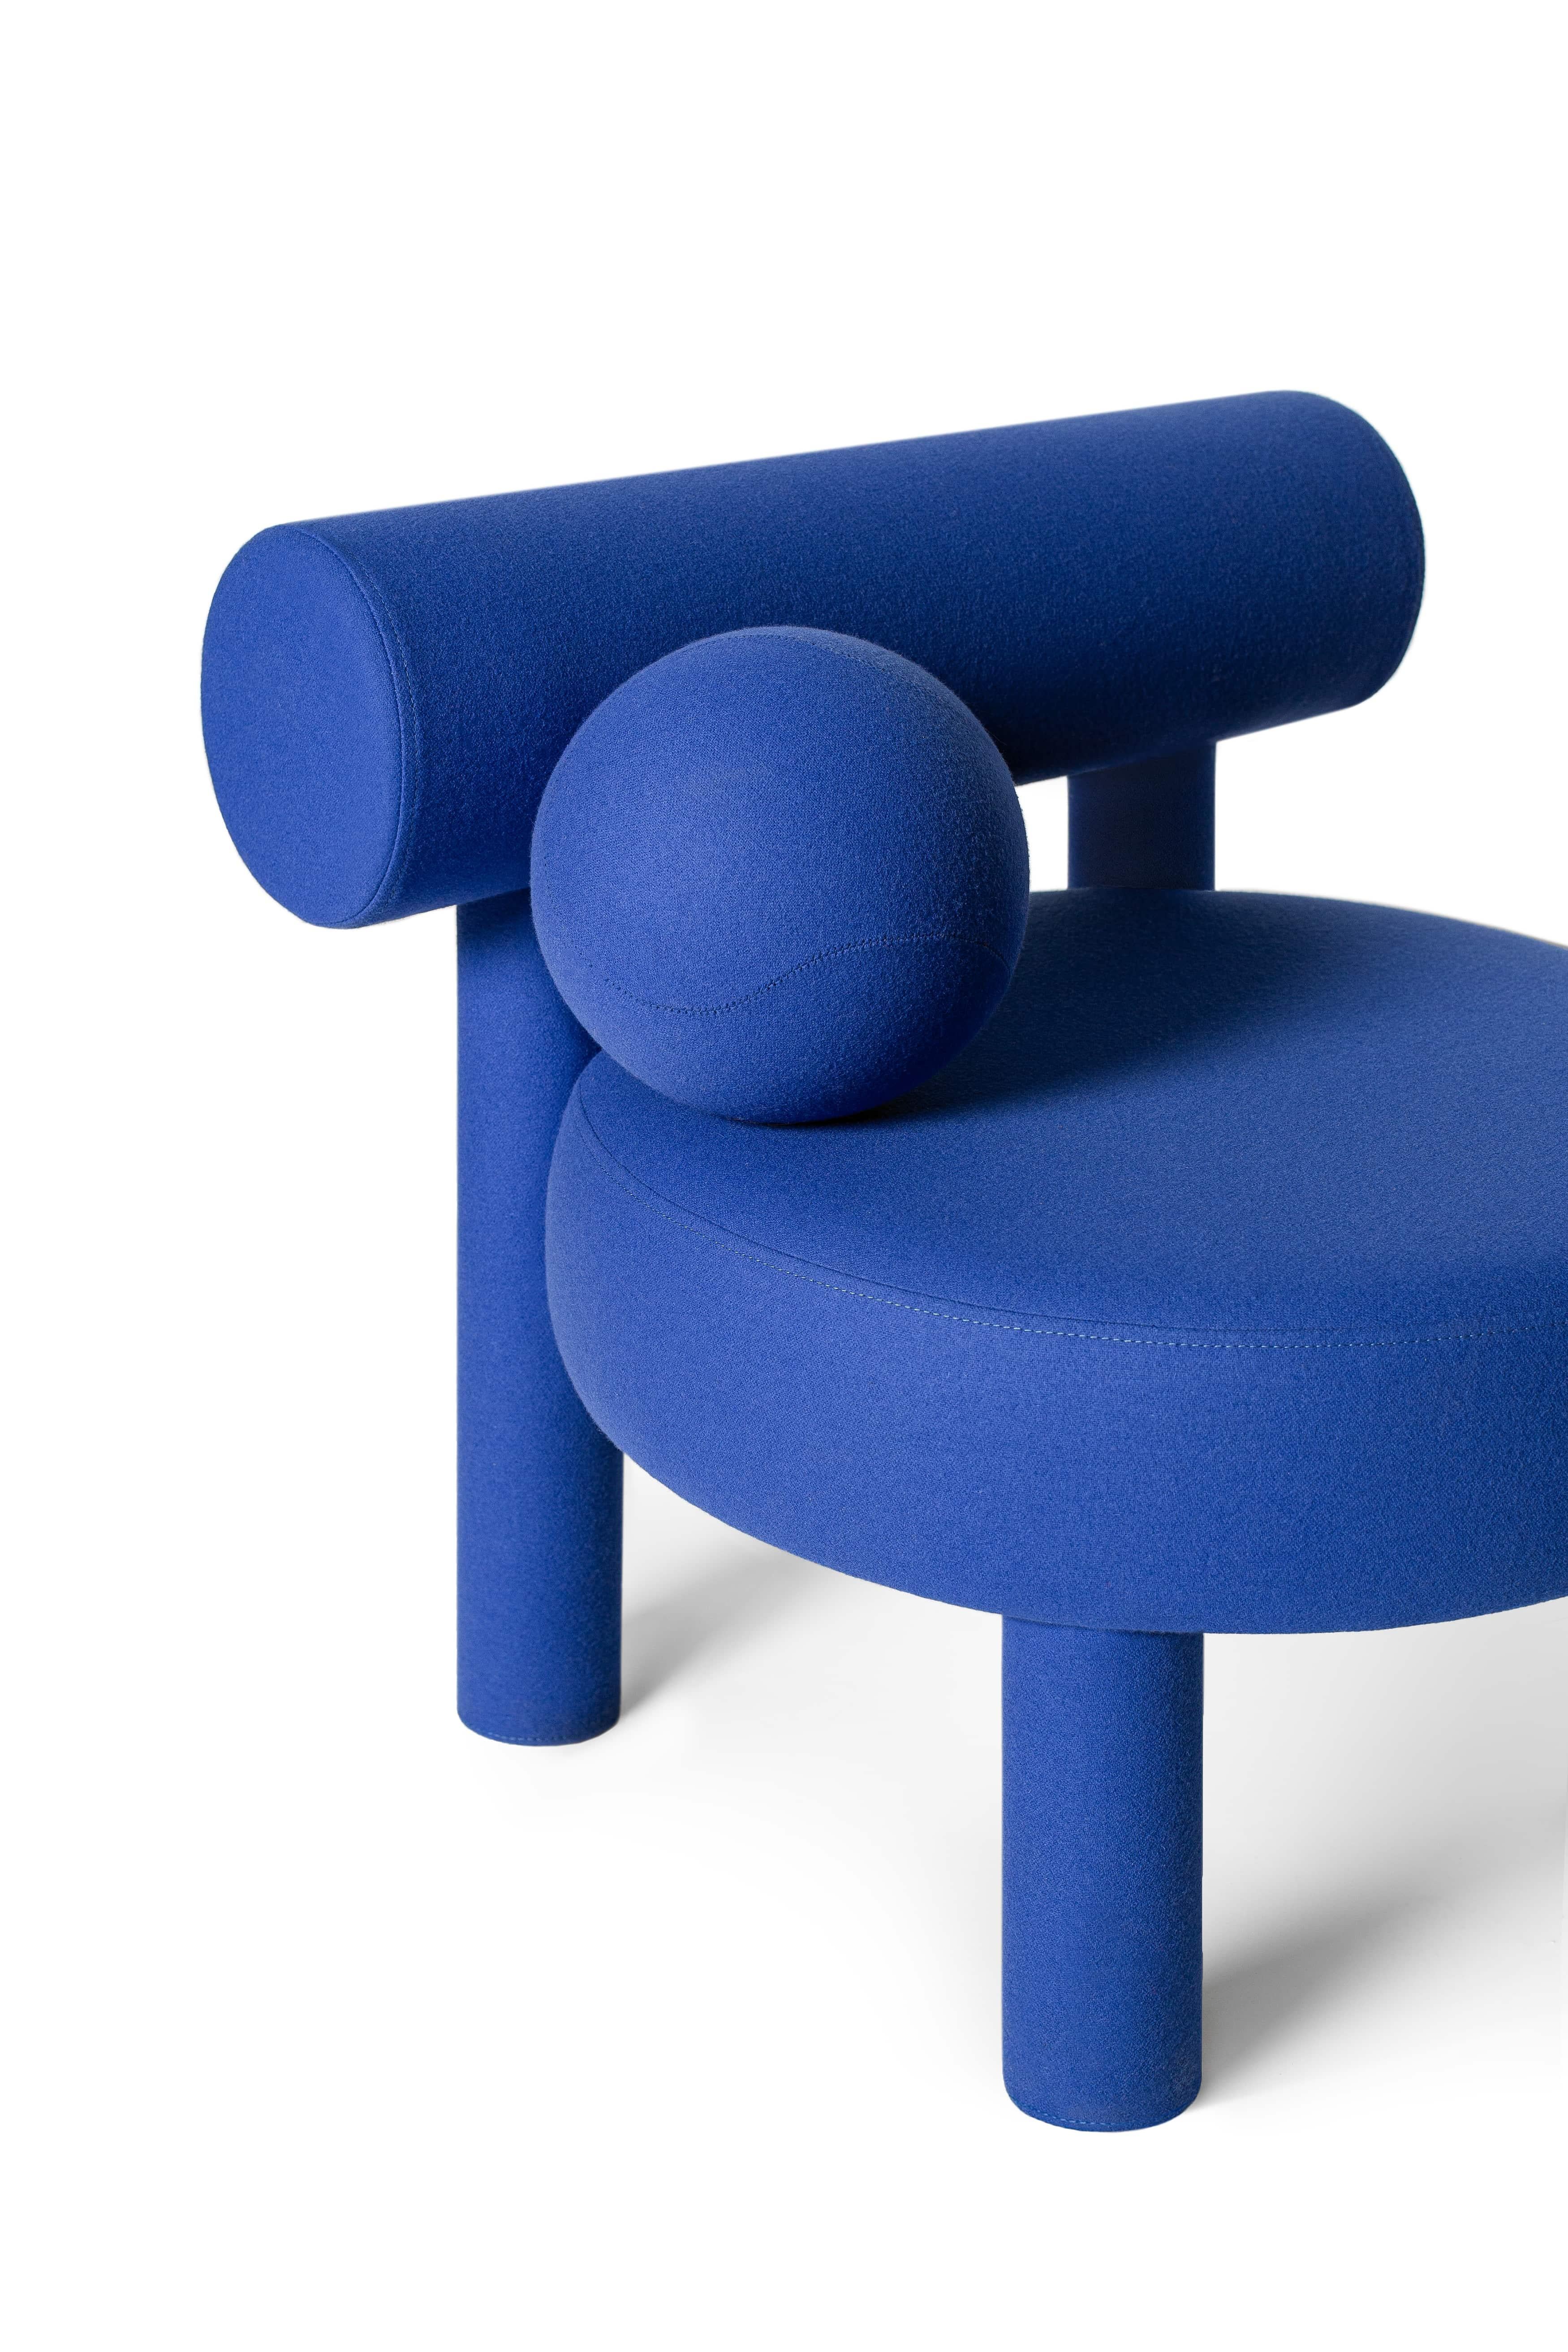 Modern Low Chair 'GROPIUS CS1' by NOOM, Blue For Sale 2